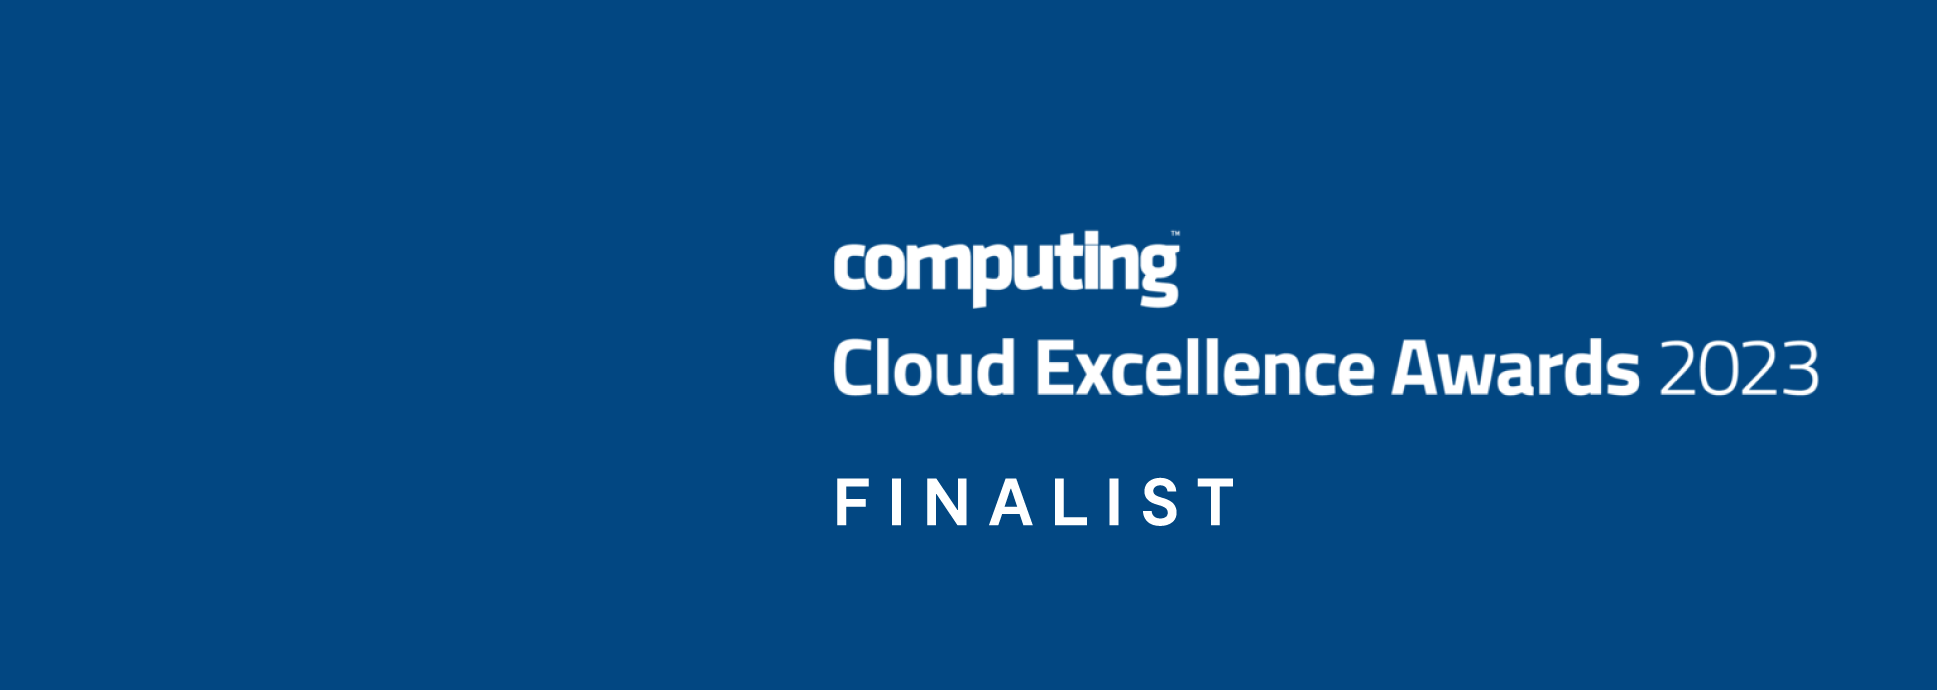 Computing-cloud-excellence-awards-banner-1